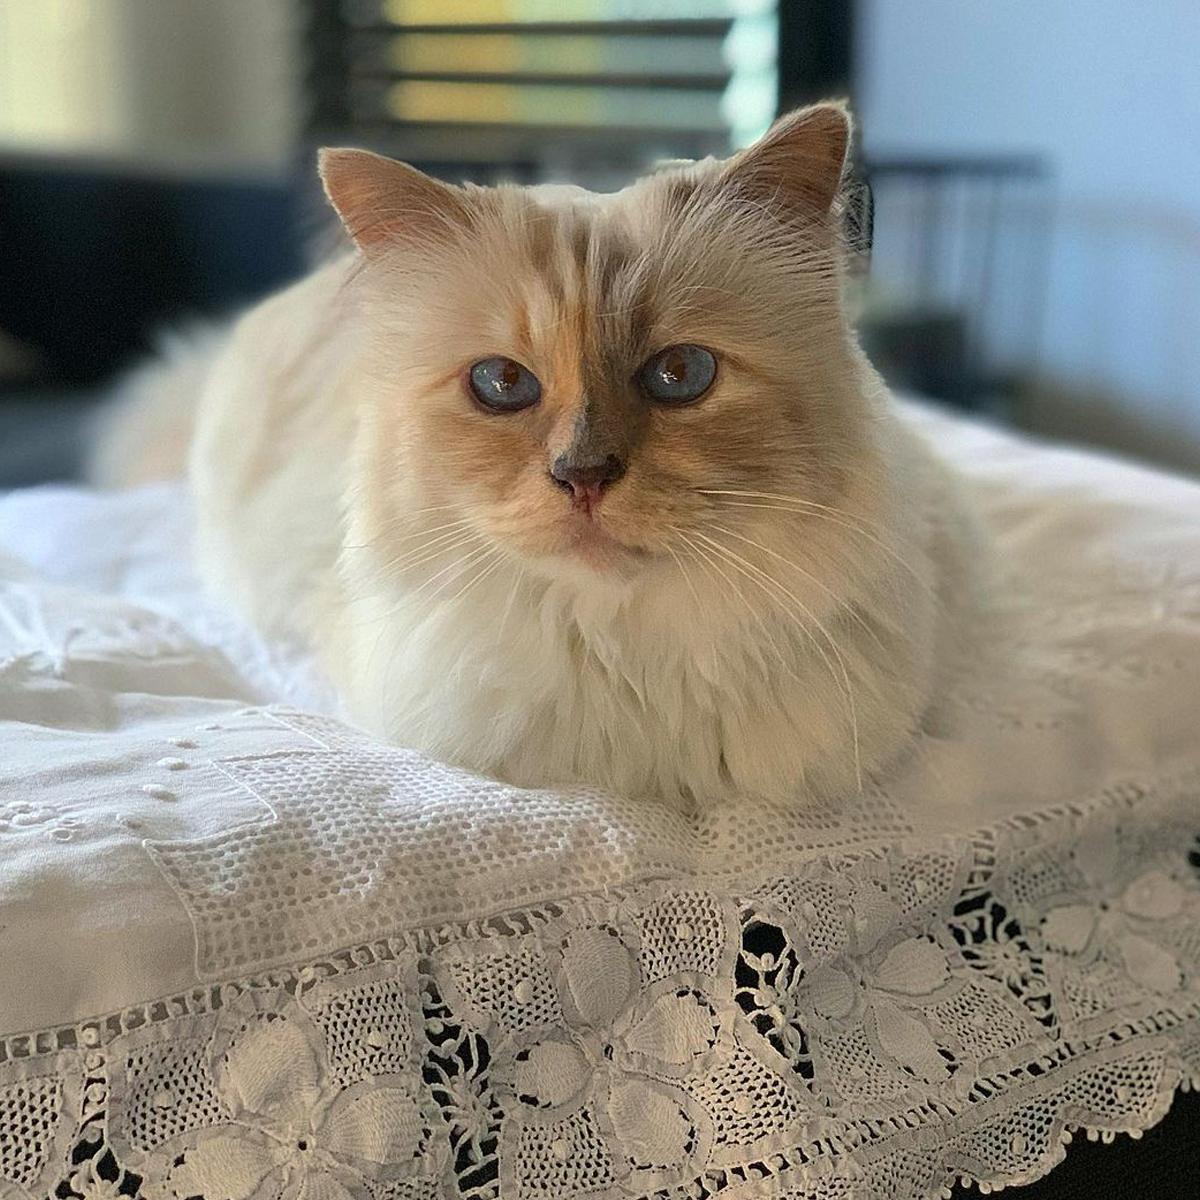 Met Gala 2023 Tributes to Karl Lagerfeld's Cat Choupette